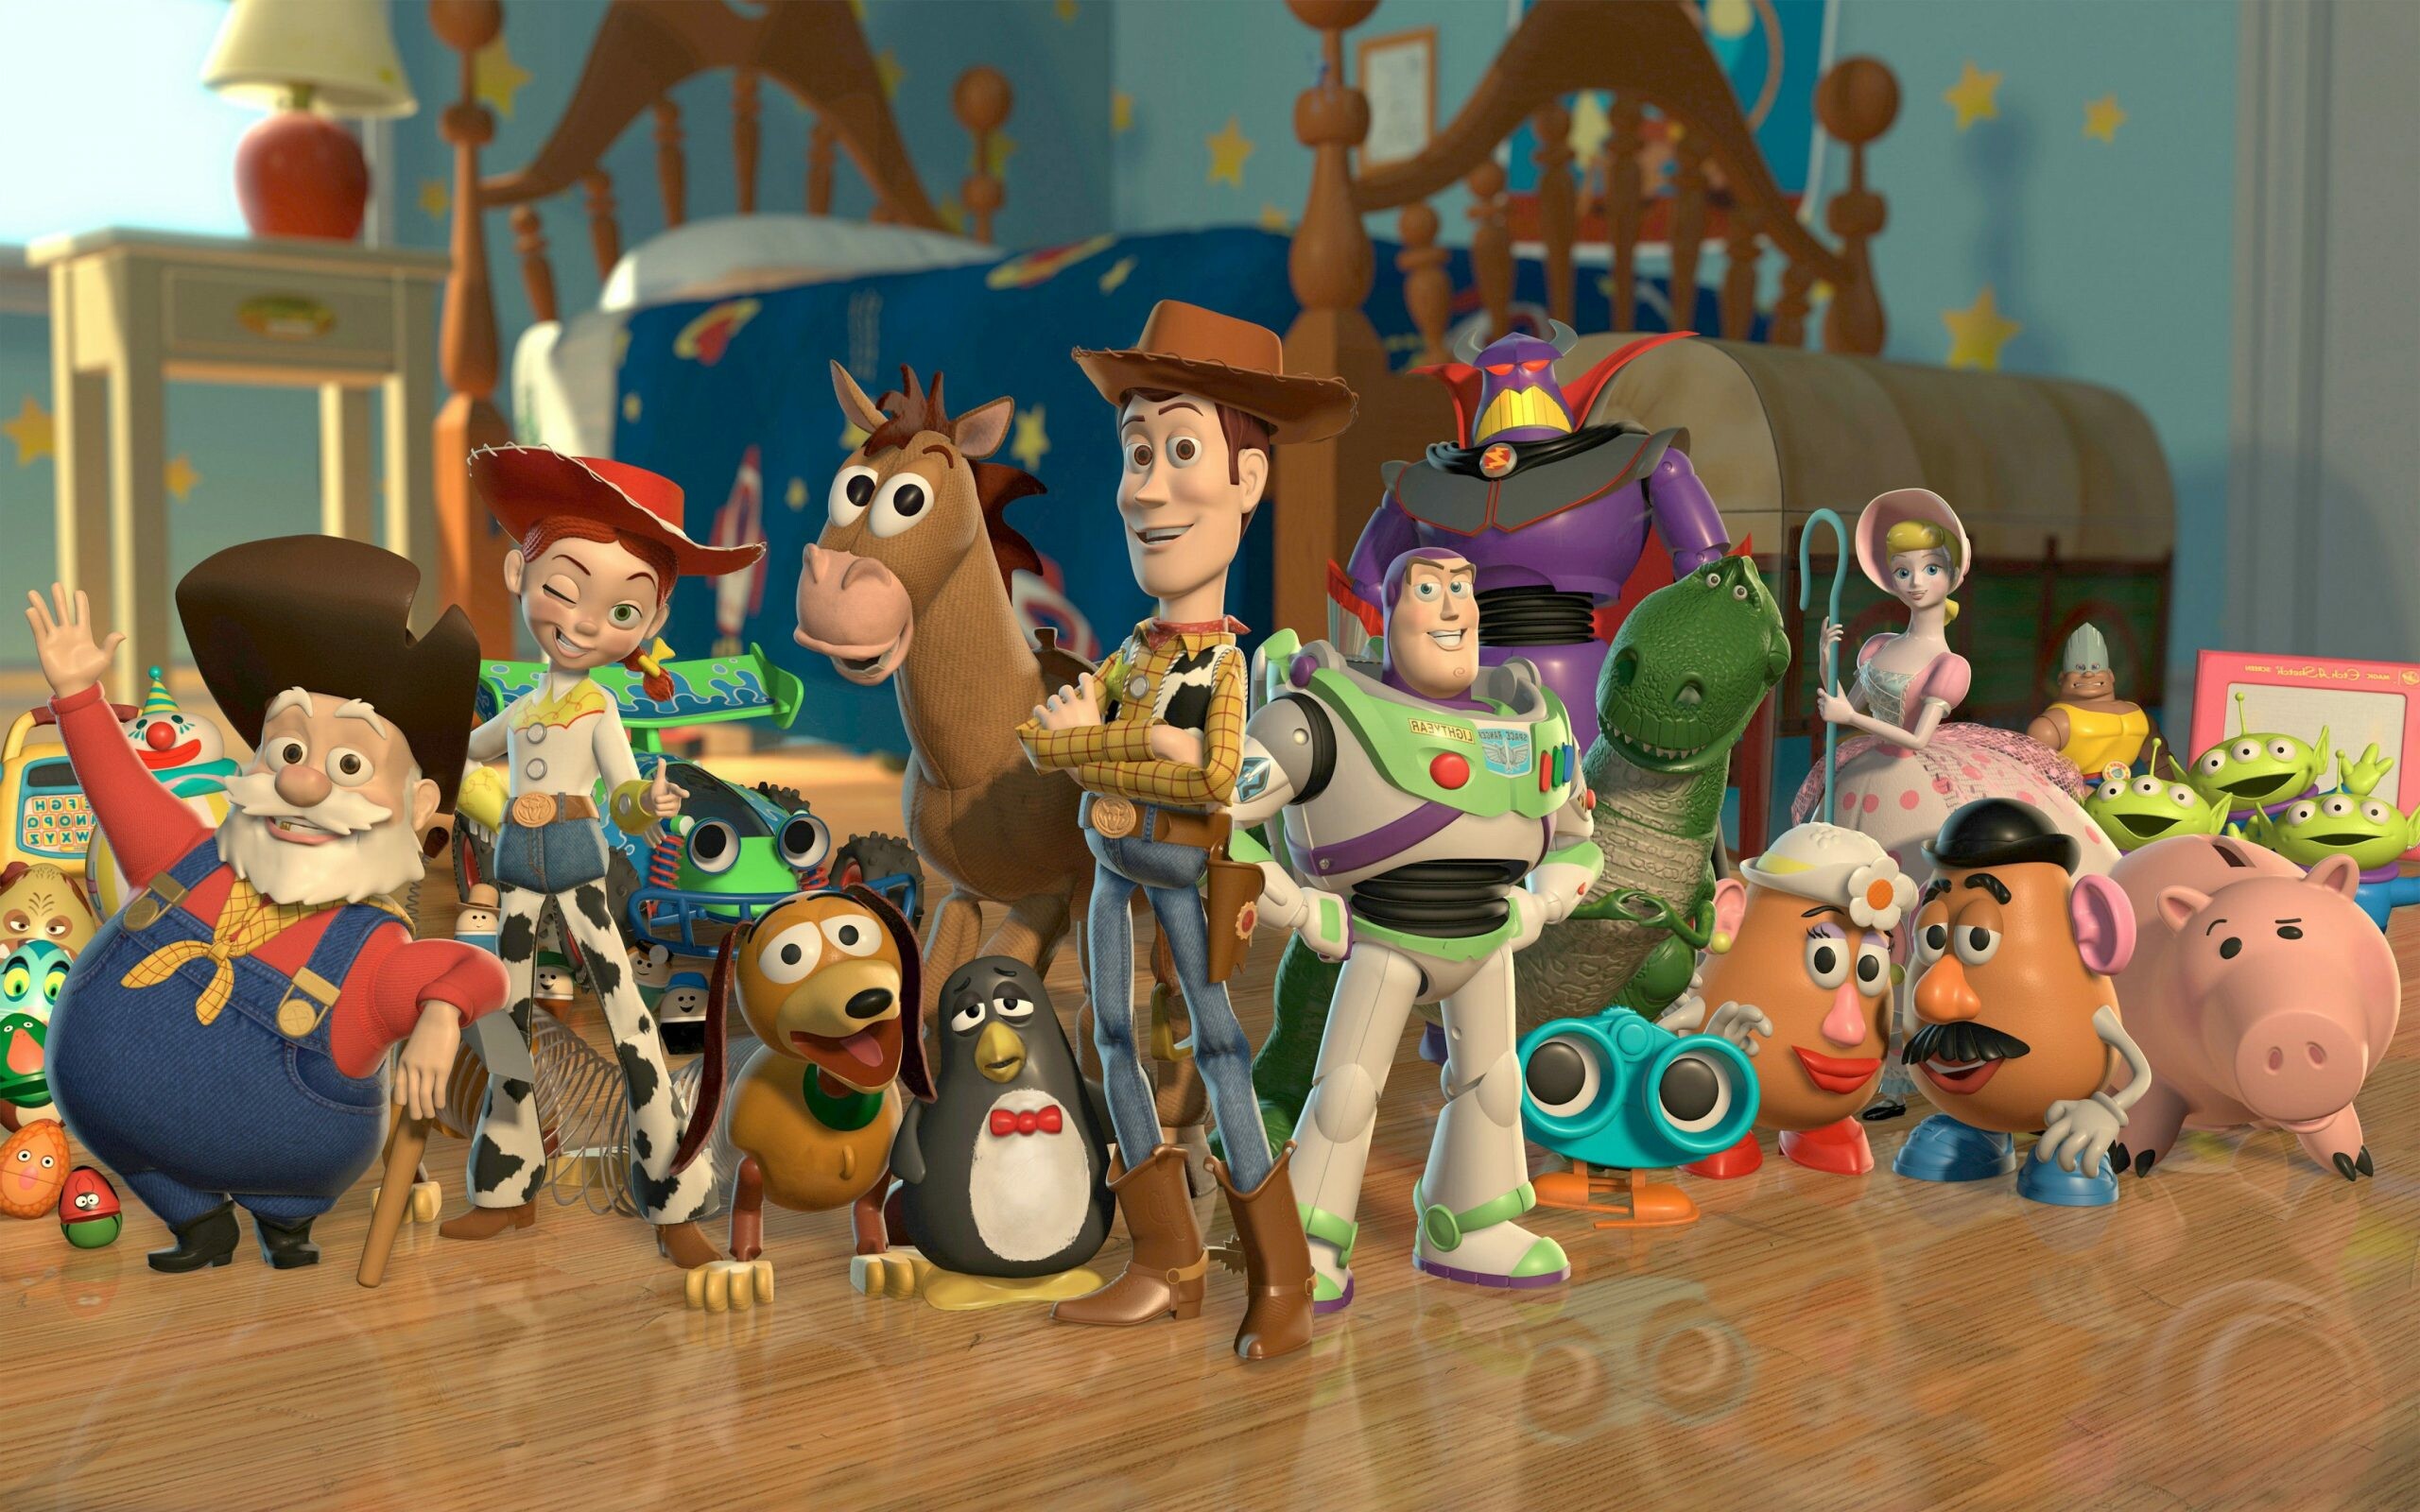 Toy Story wallpapers, HD for PC, Animated nostalgia, Free download, 2560x1600 HD Desktop